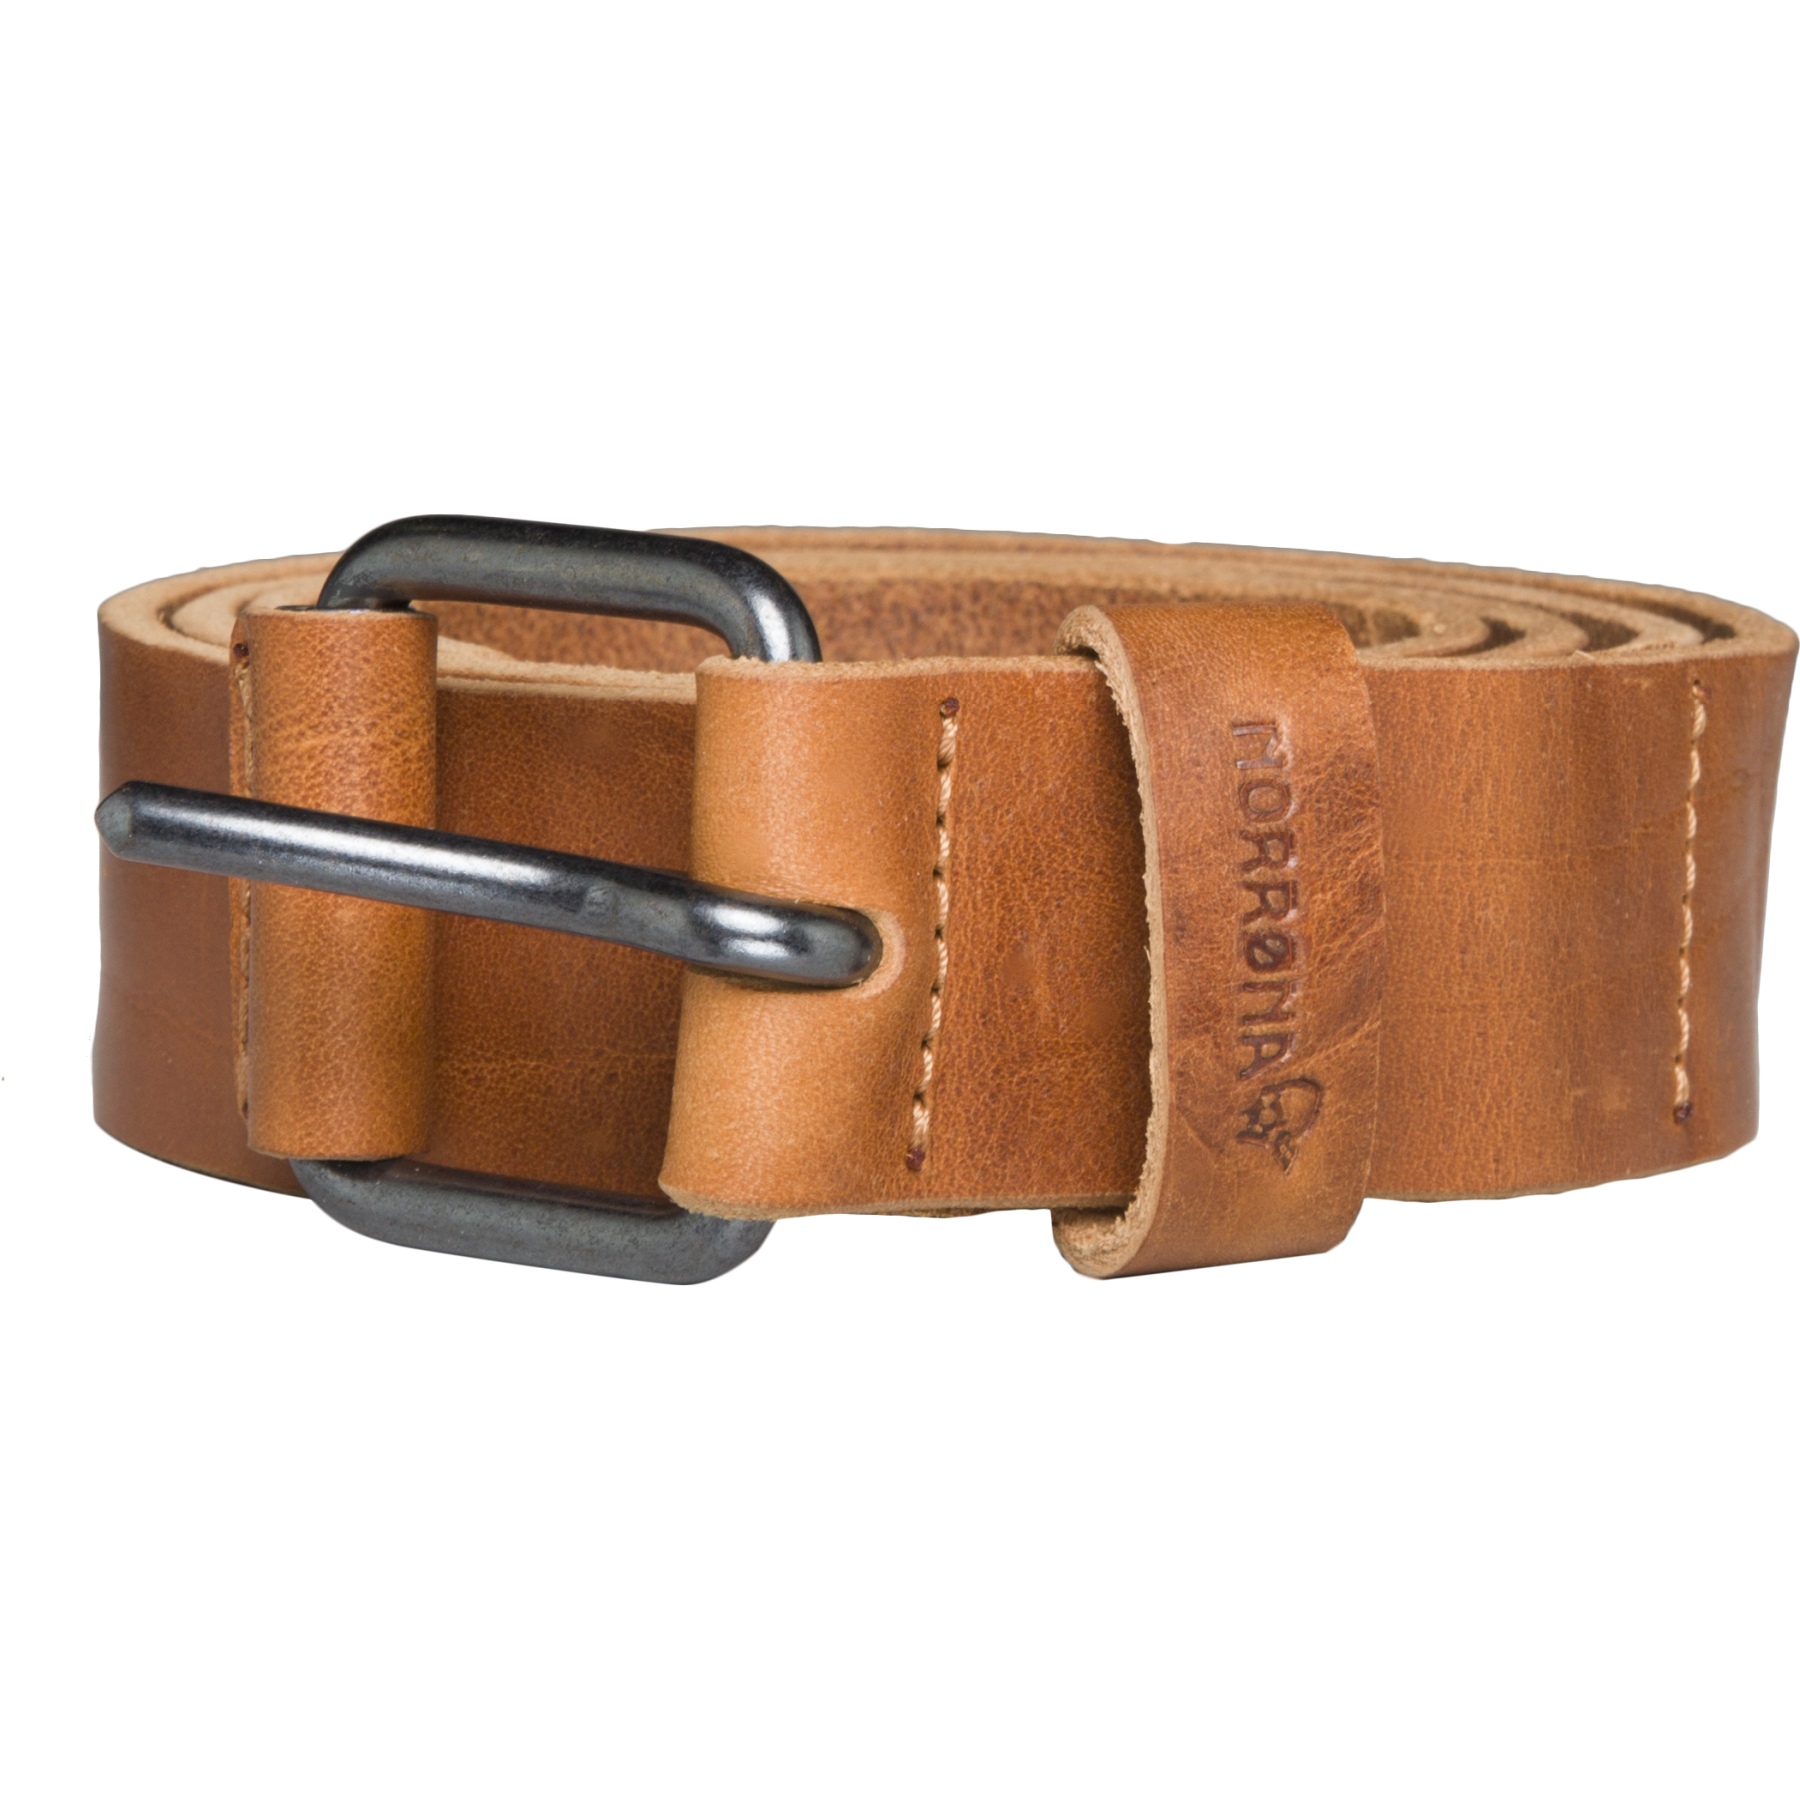 Picture of Norrona /29 leather Belt - Brown